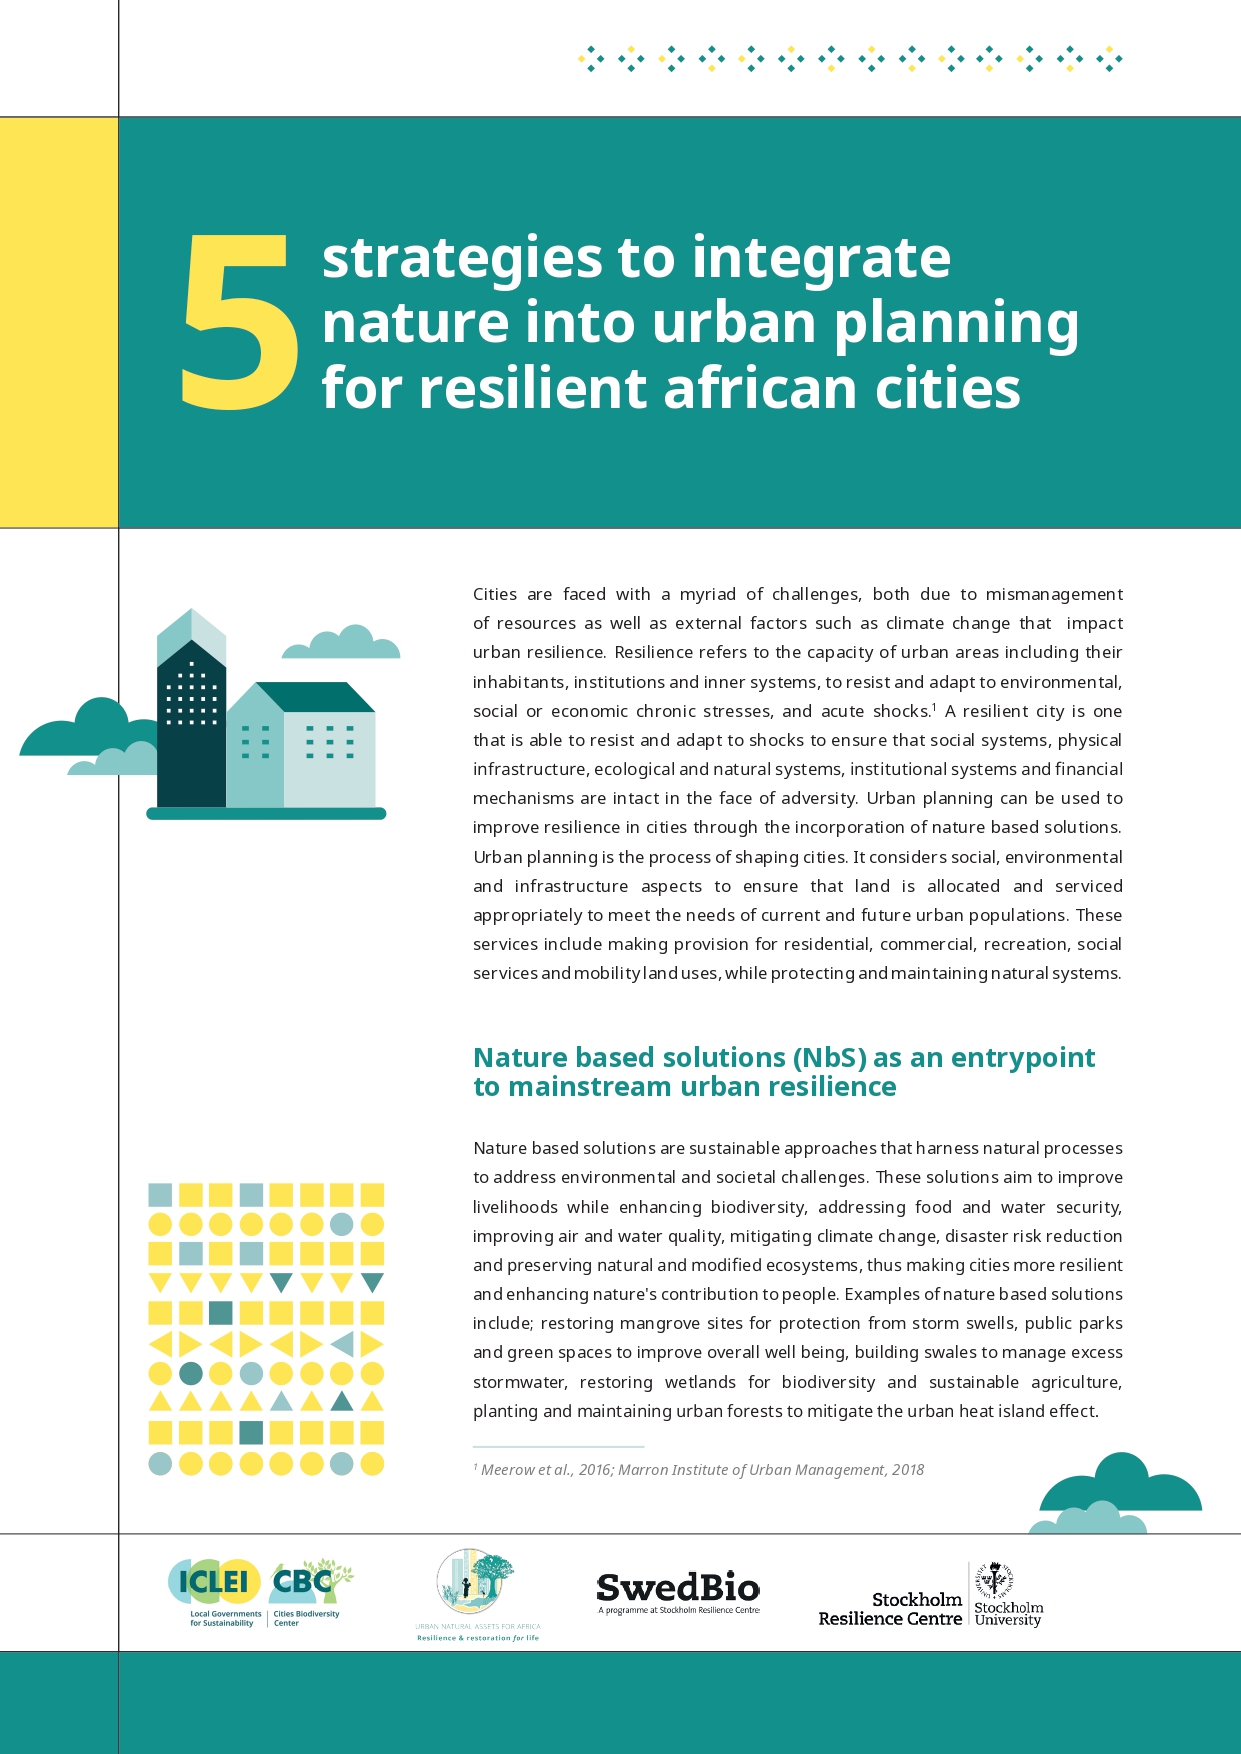 5 strategies to integrate nature into urban planning for resilient African cities